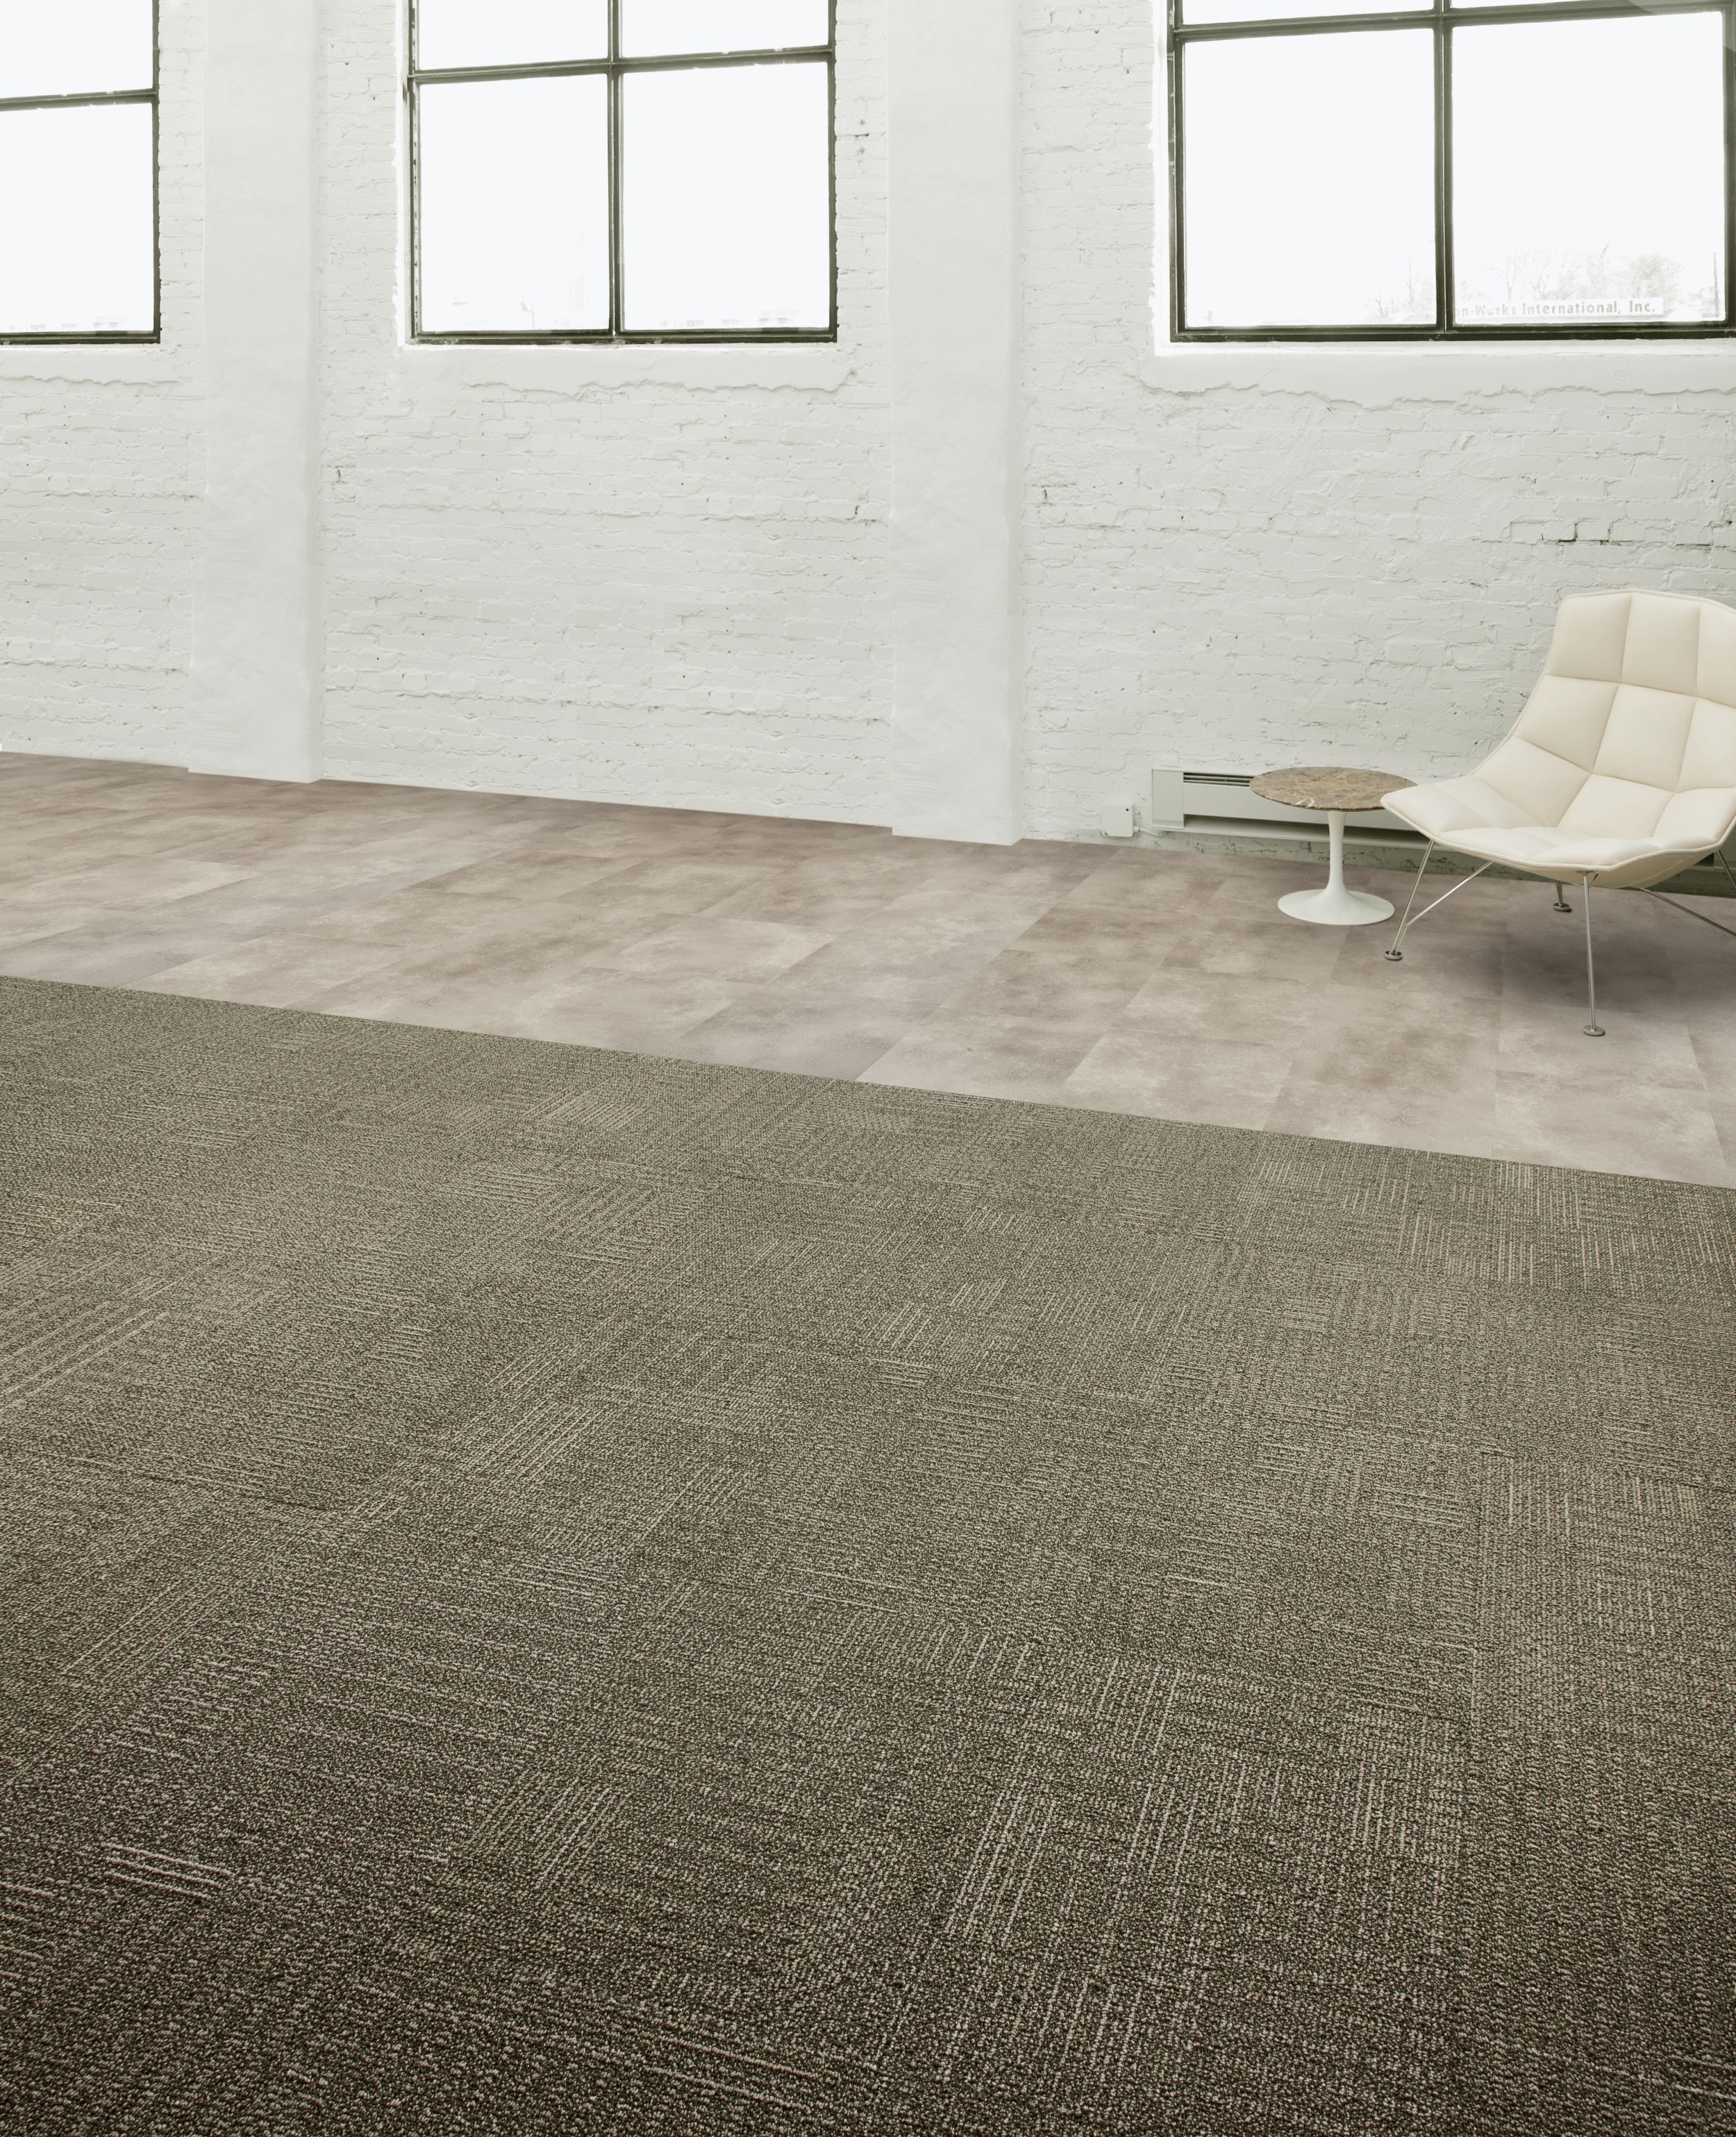 Interface CT101 carpet tile and Textured Stones LVT in open area with concrete walls and chair image number 5